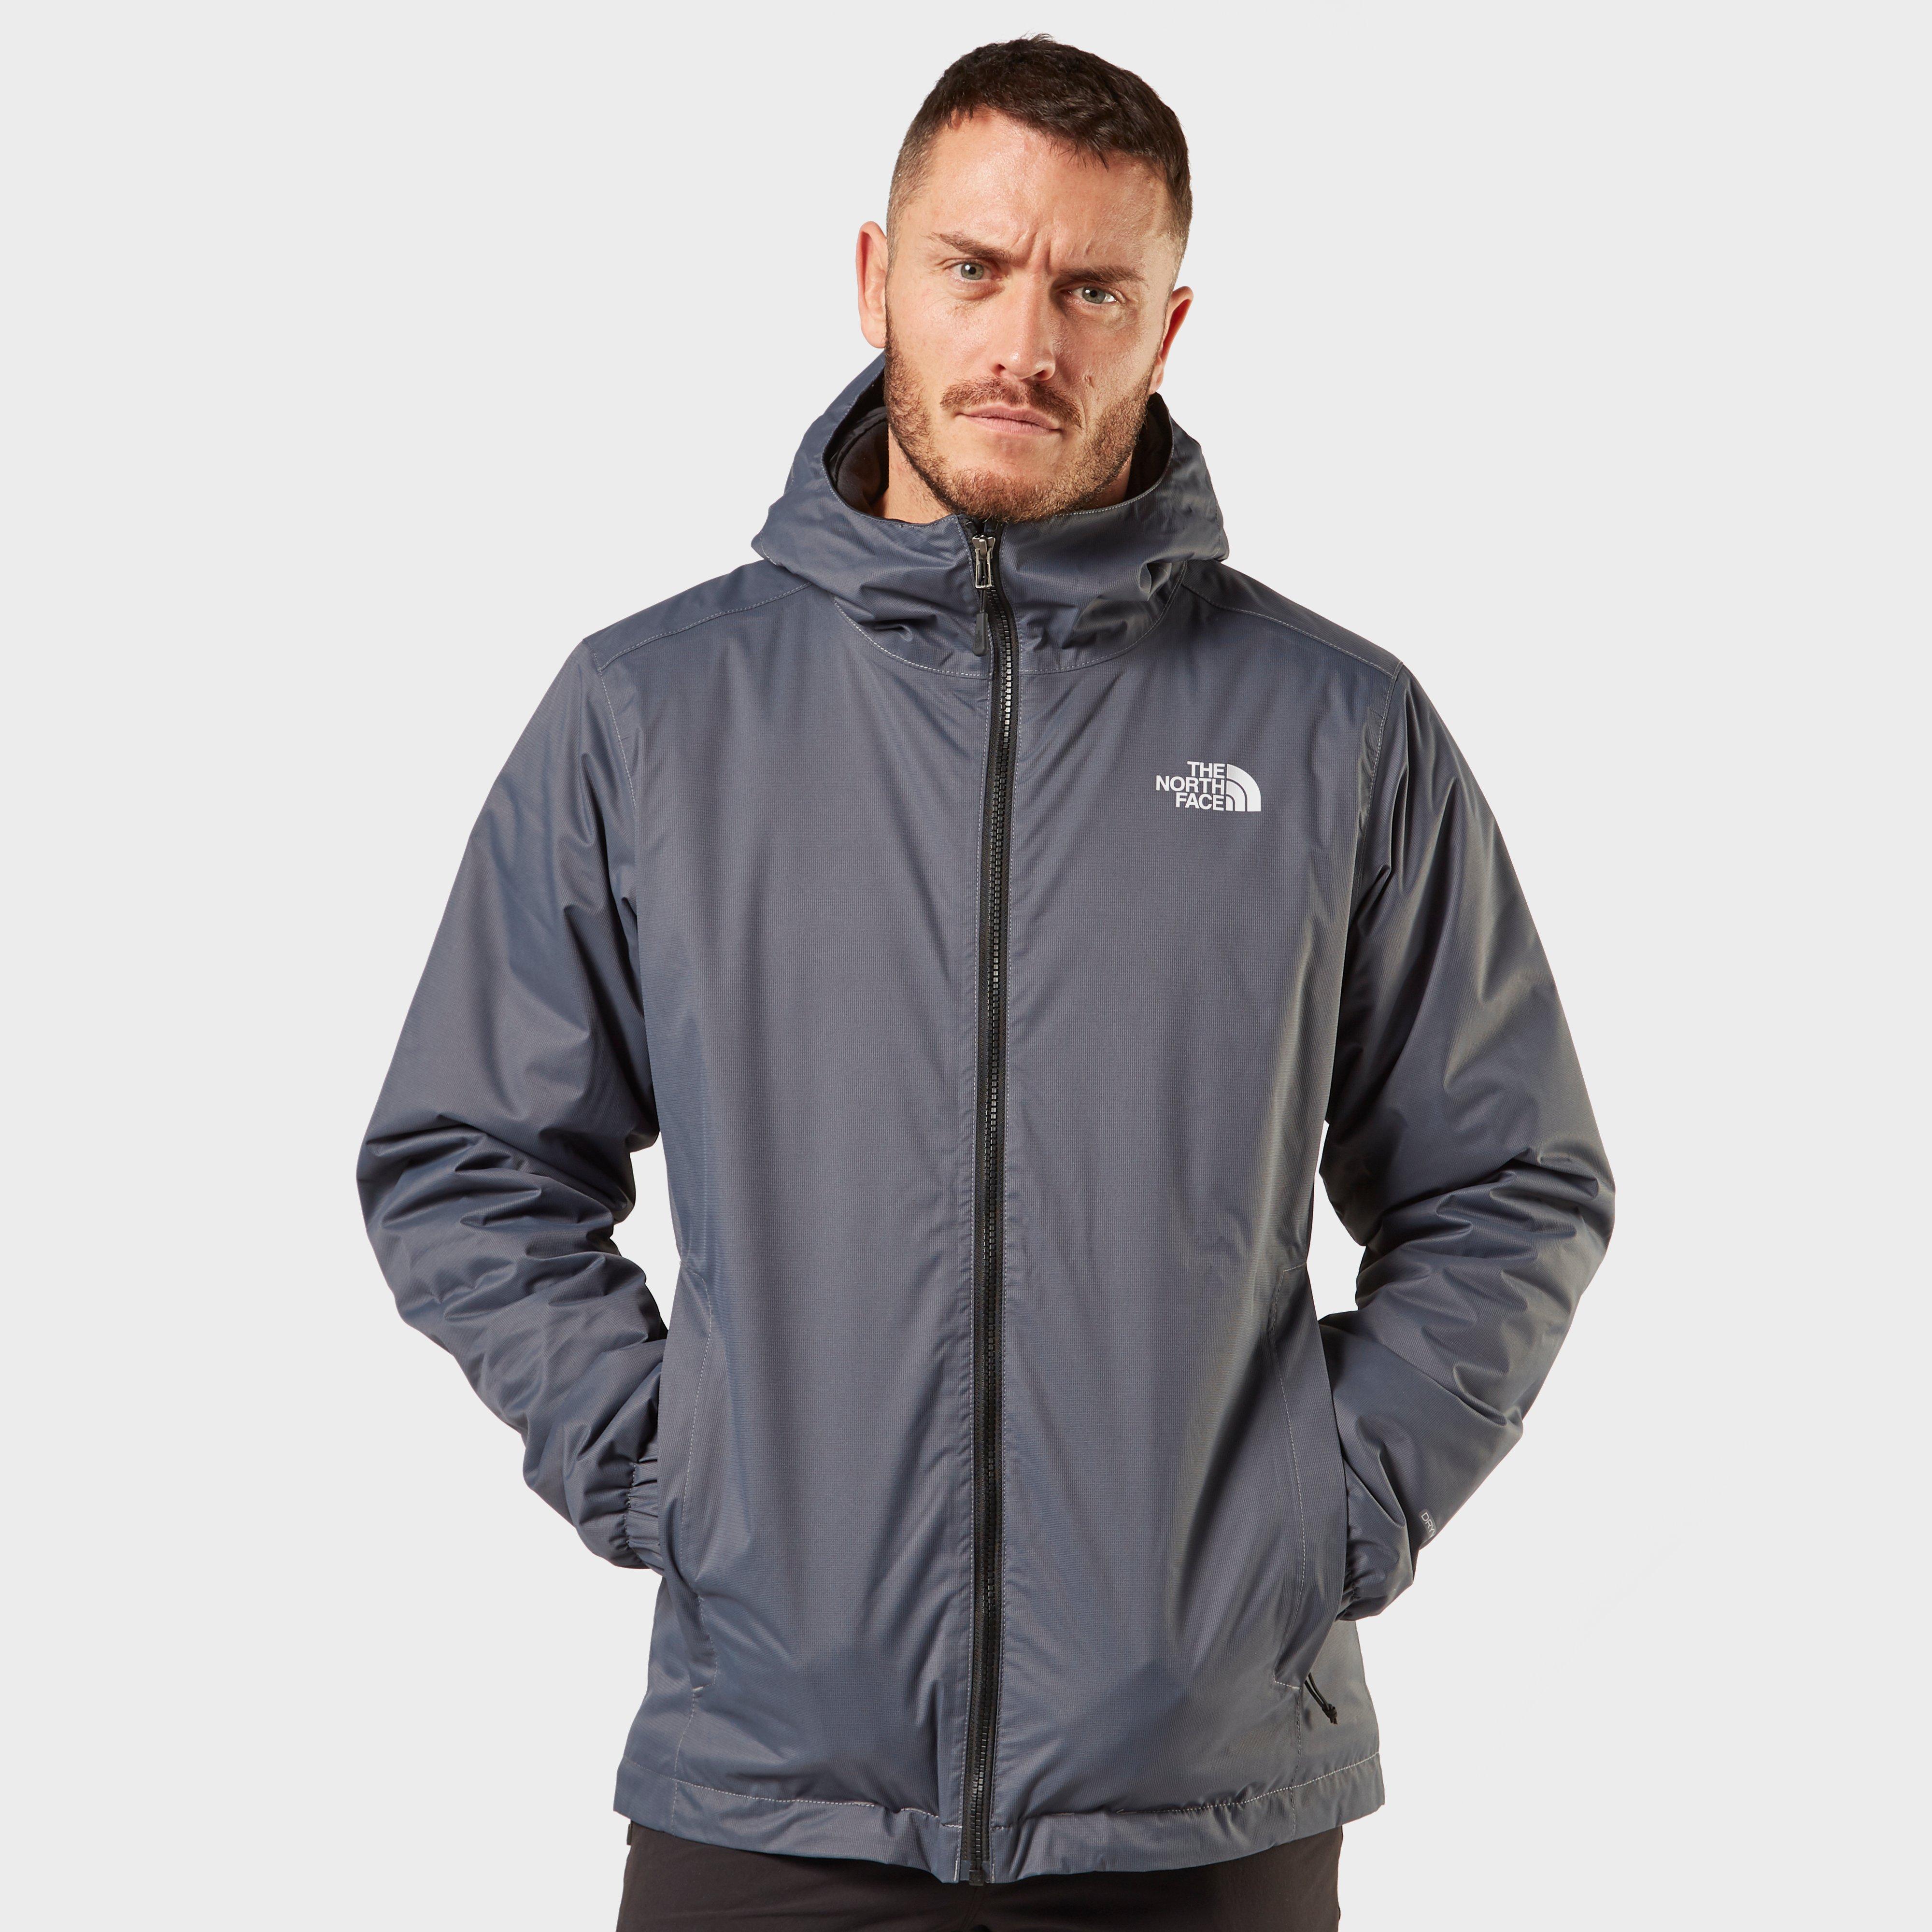 North Face Men's Quest Insulated Jacket 